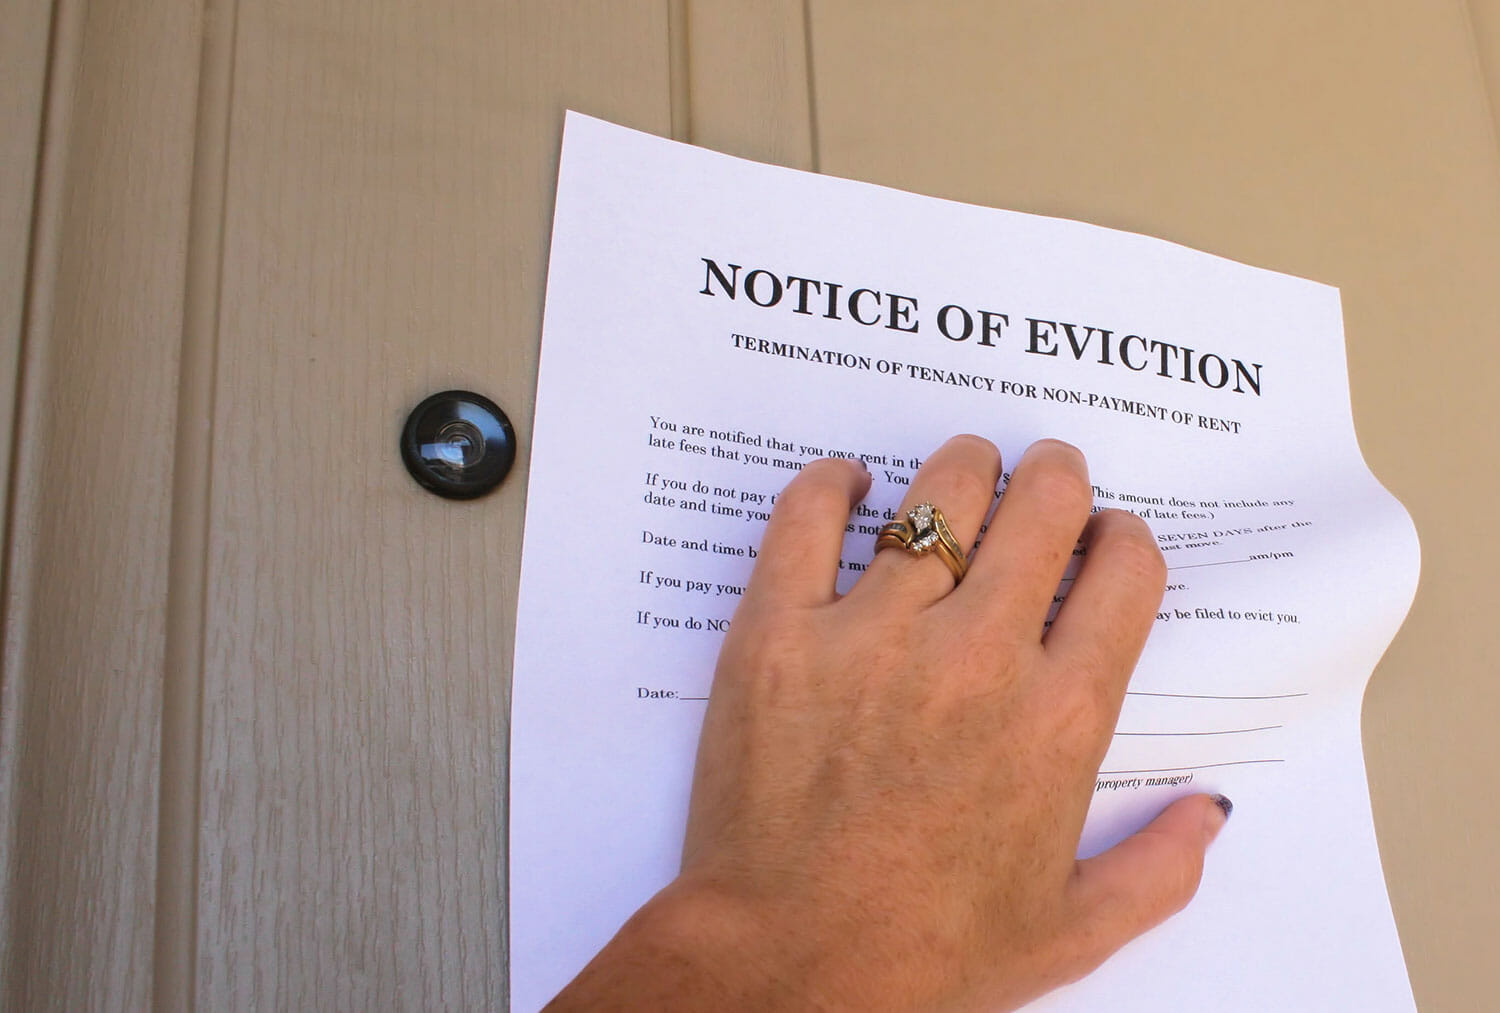 When Can a Landlord Evict a Tenant?